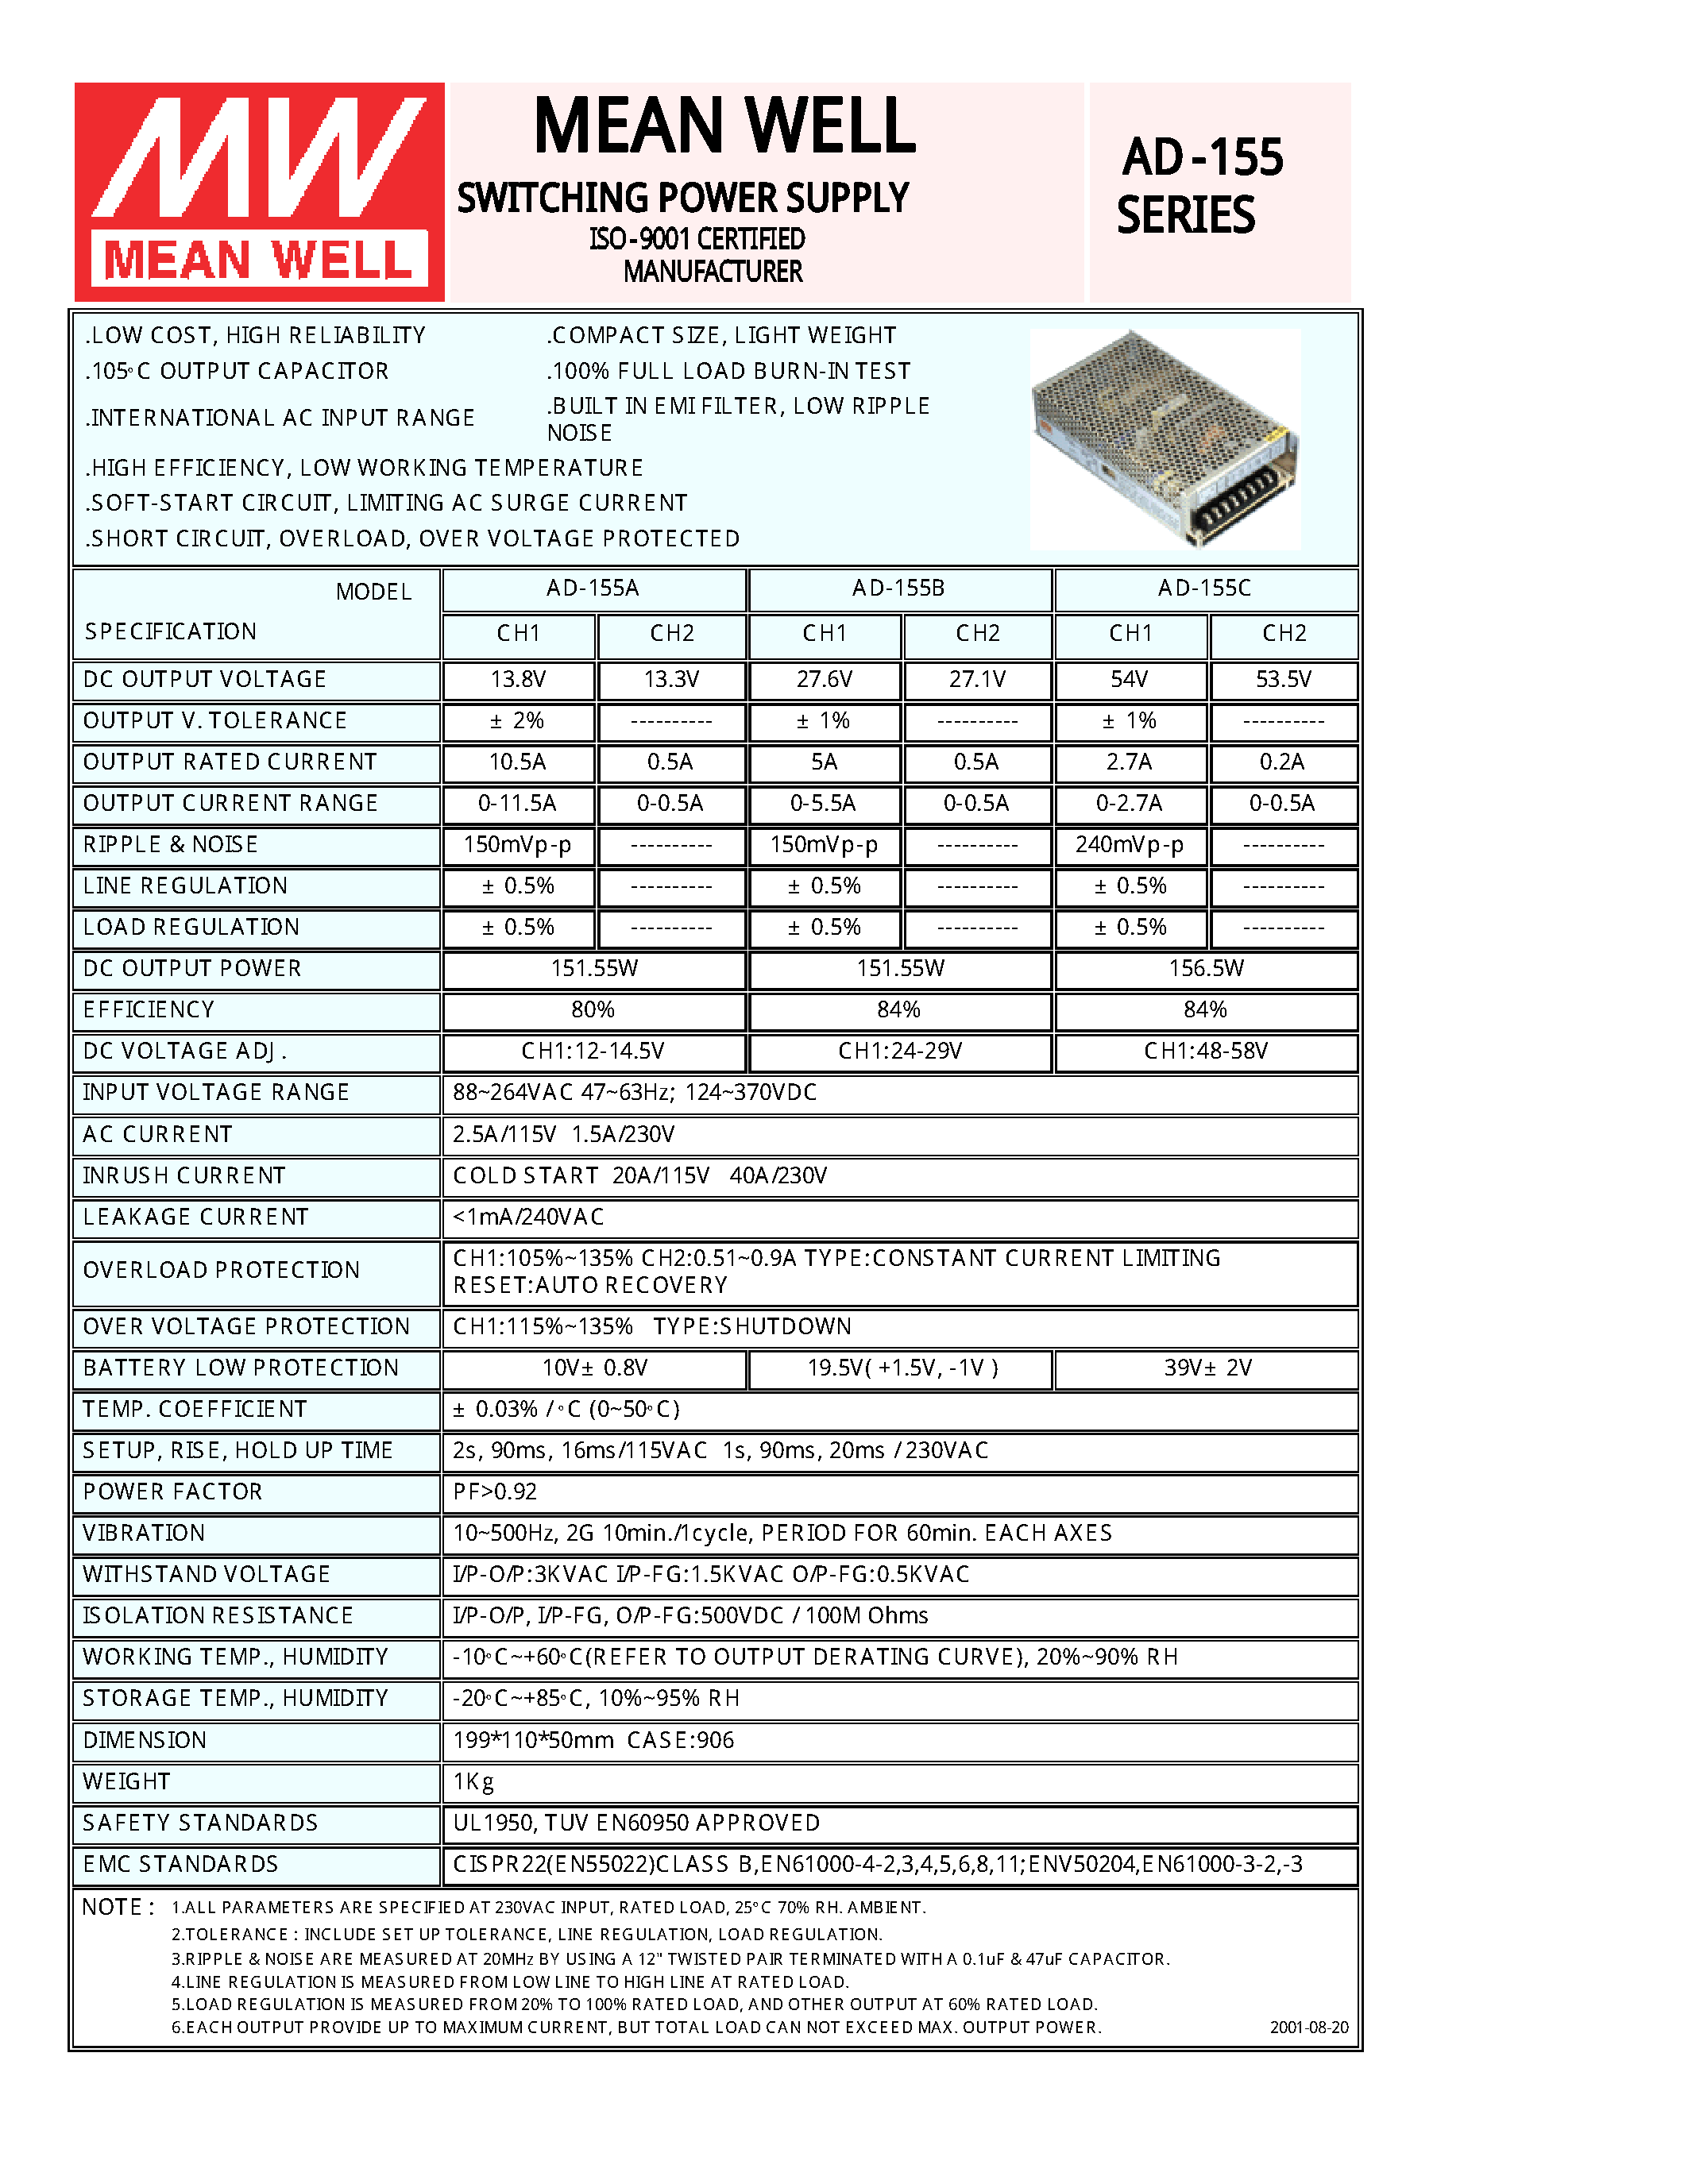 Datasheet PS-AD155 - SWITCHING POWER SUPPLY page 1